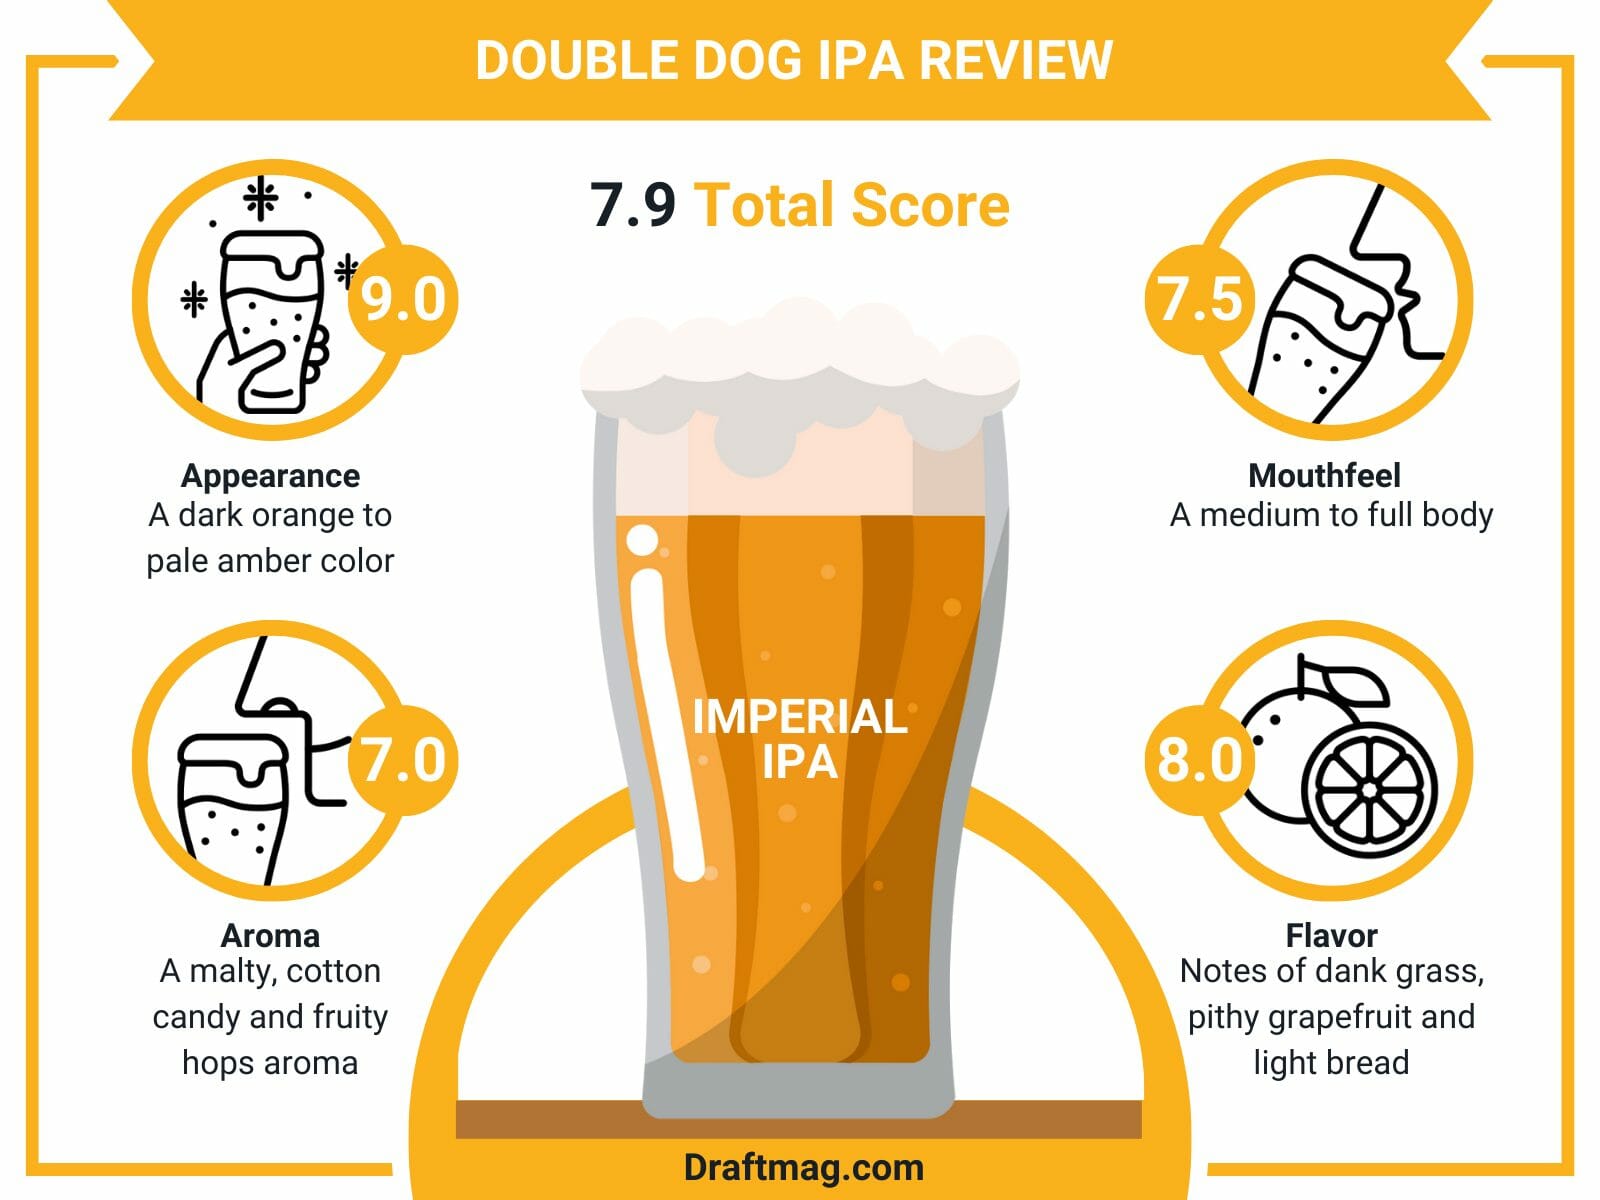 Double dog ipa review infographic